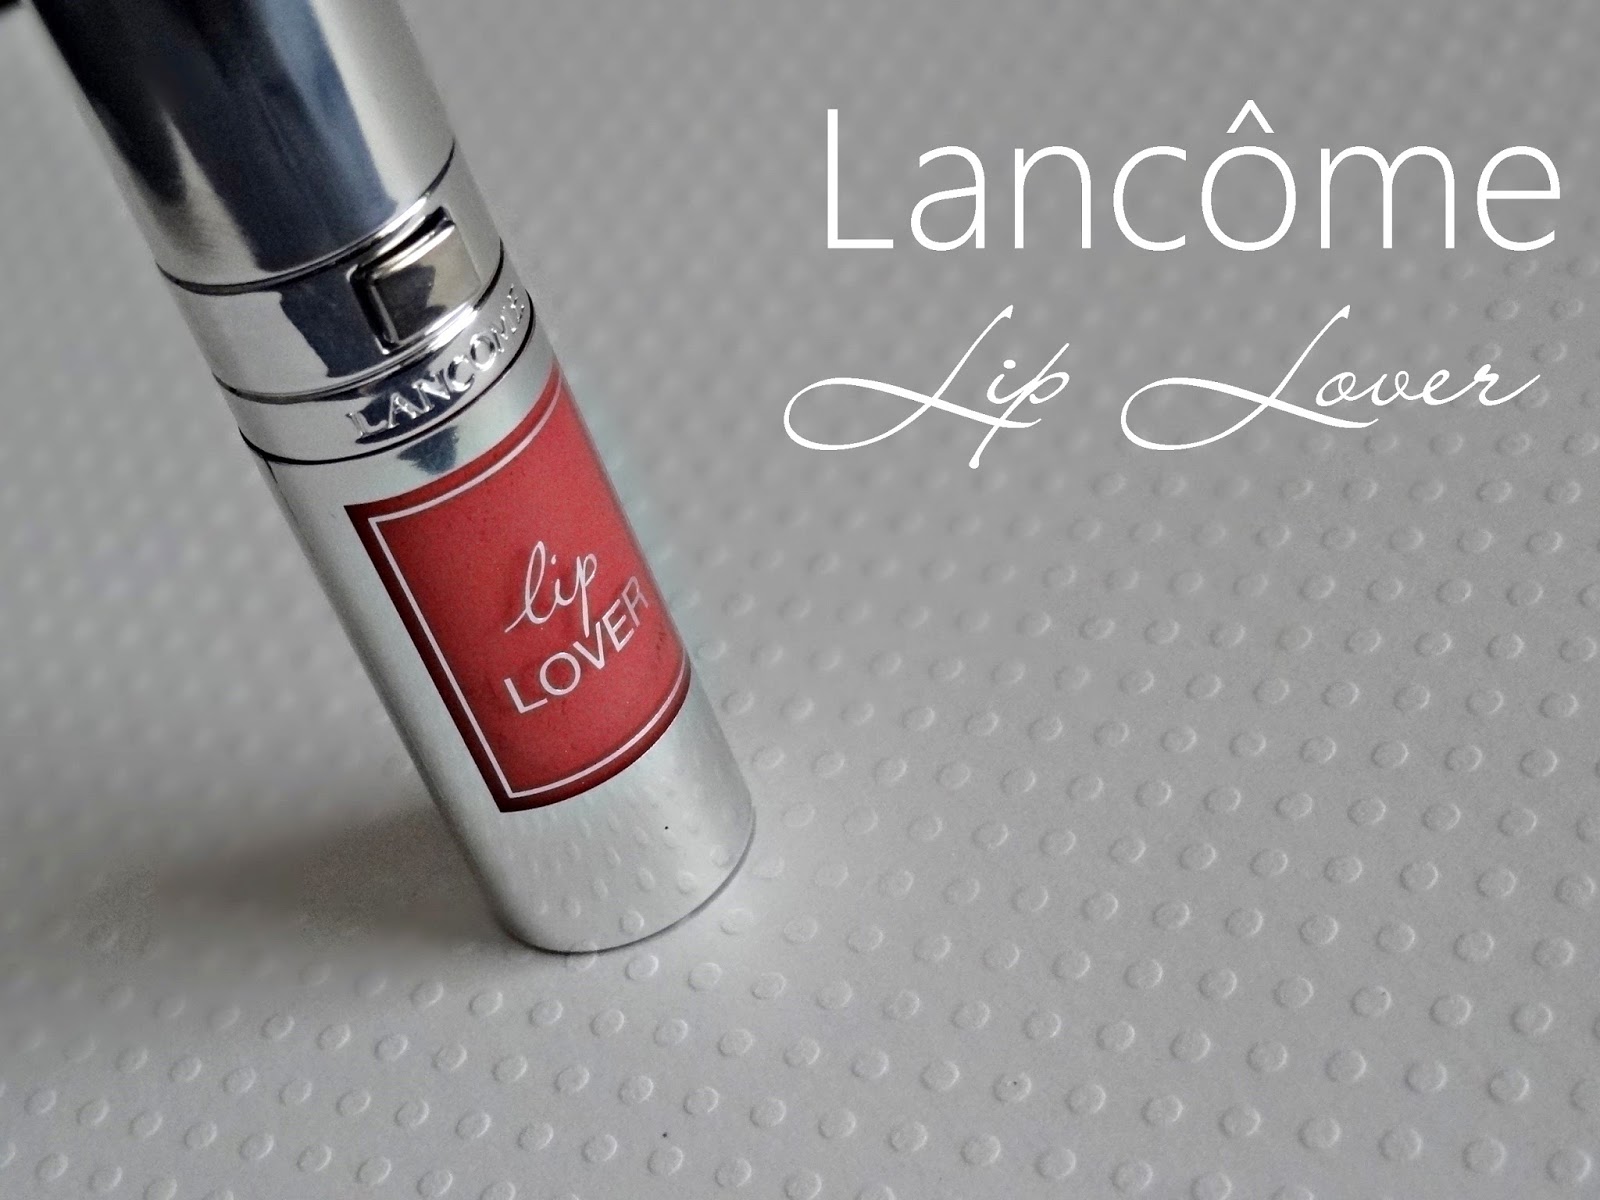 Lancome Lip Lover Dewy Lip Perfector in Beige Adage Review, Photos & Swatches